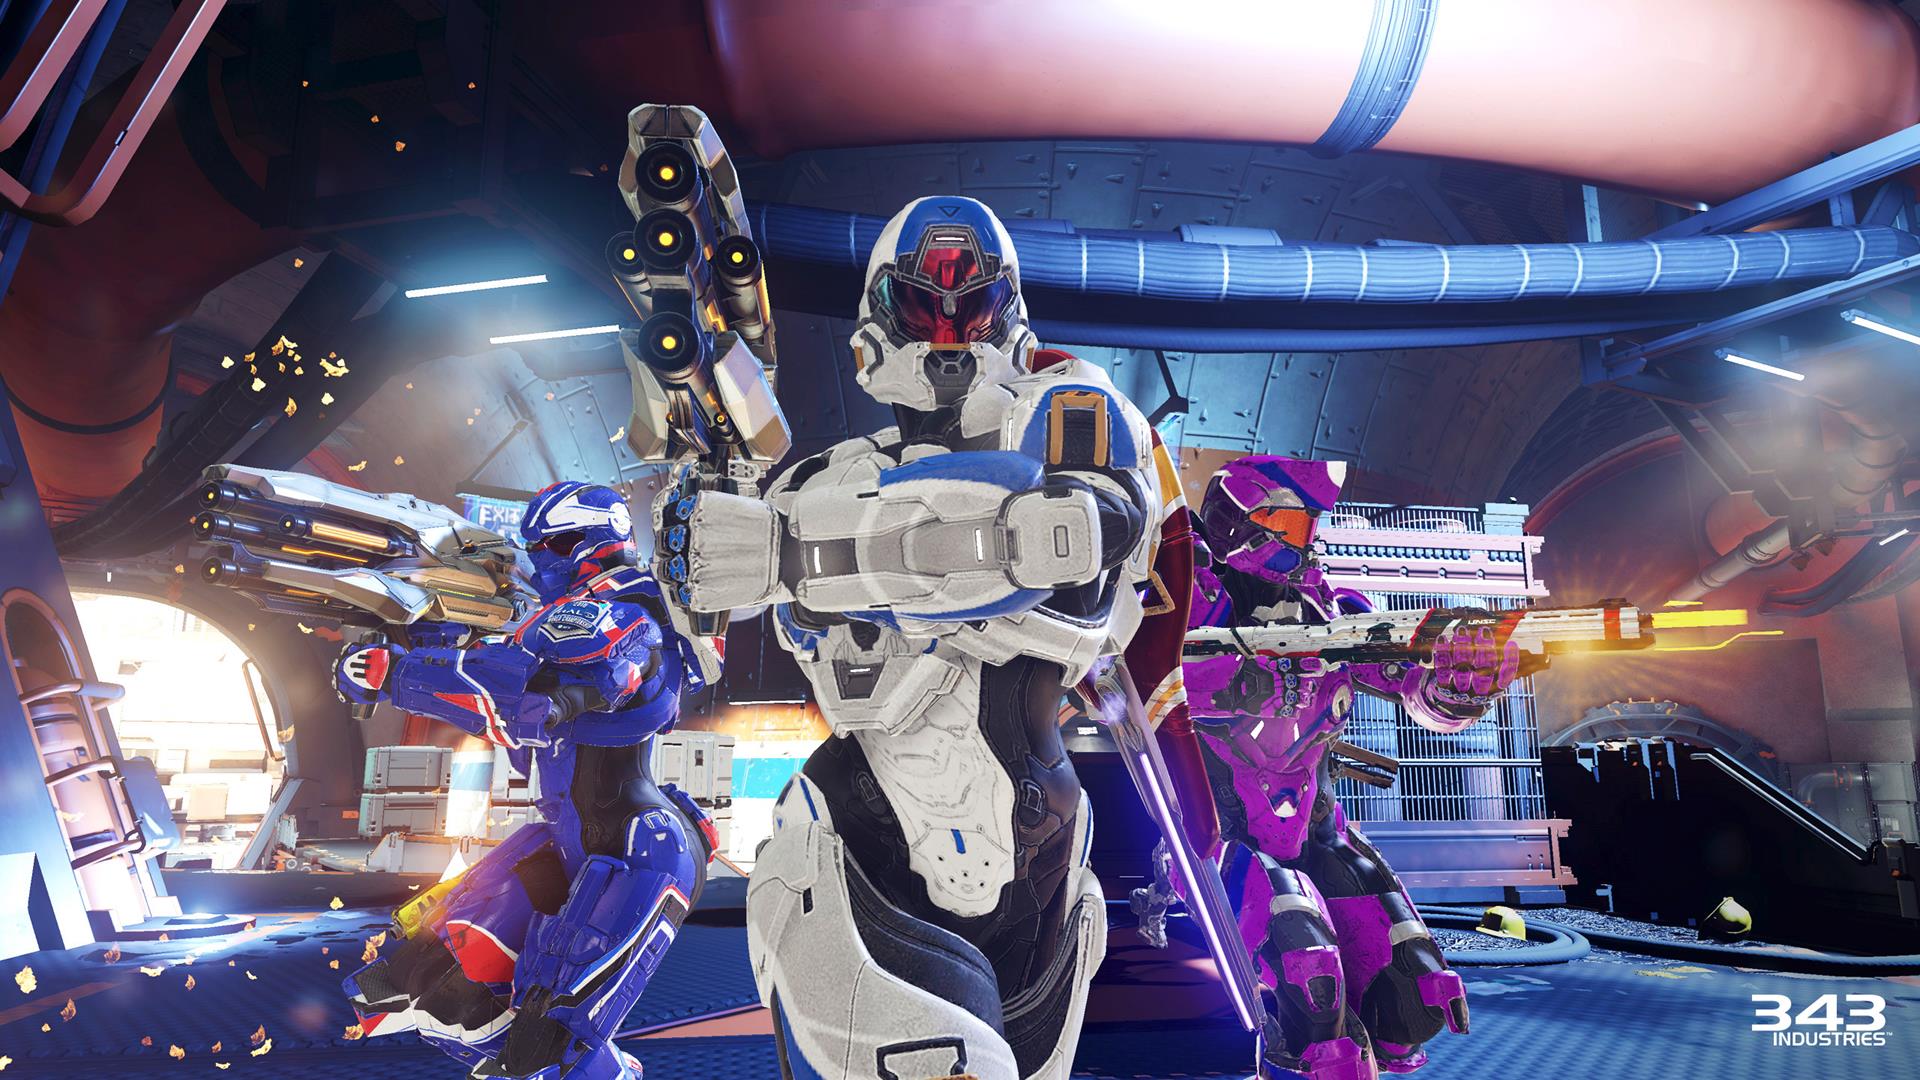 Image for Just a reminder you can make Halo 5 levels on your PC now